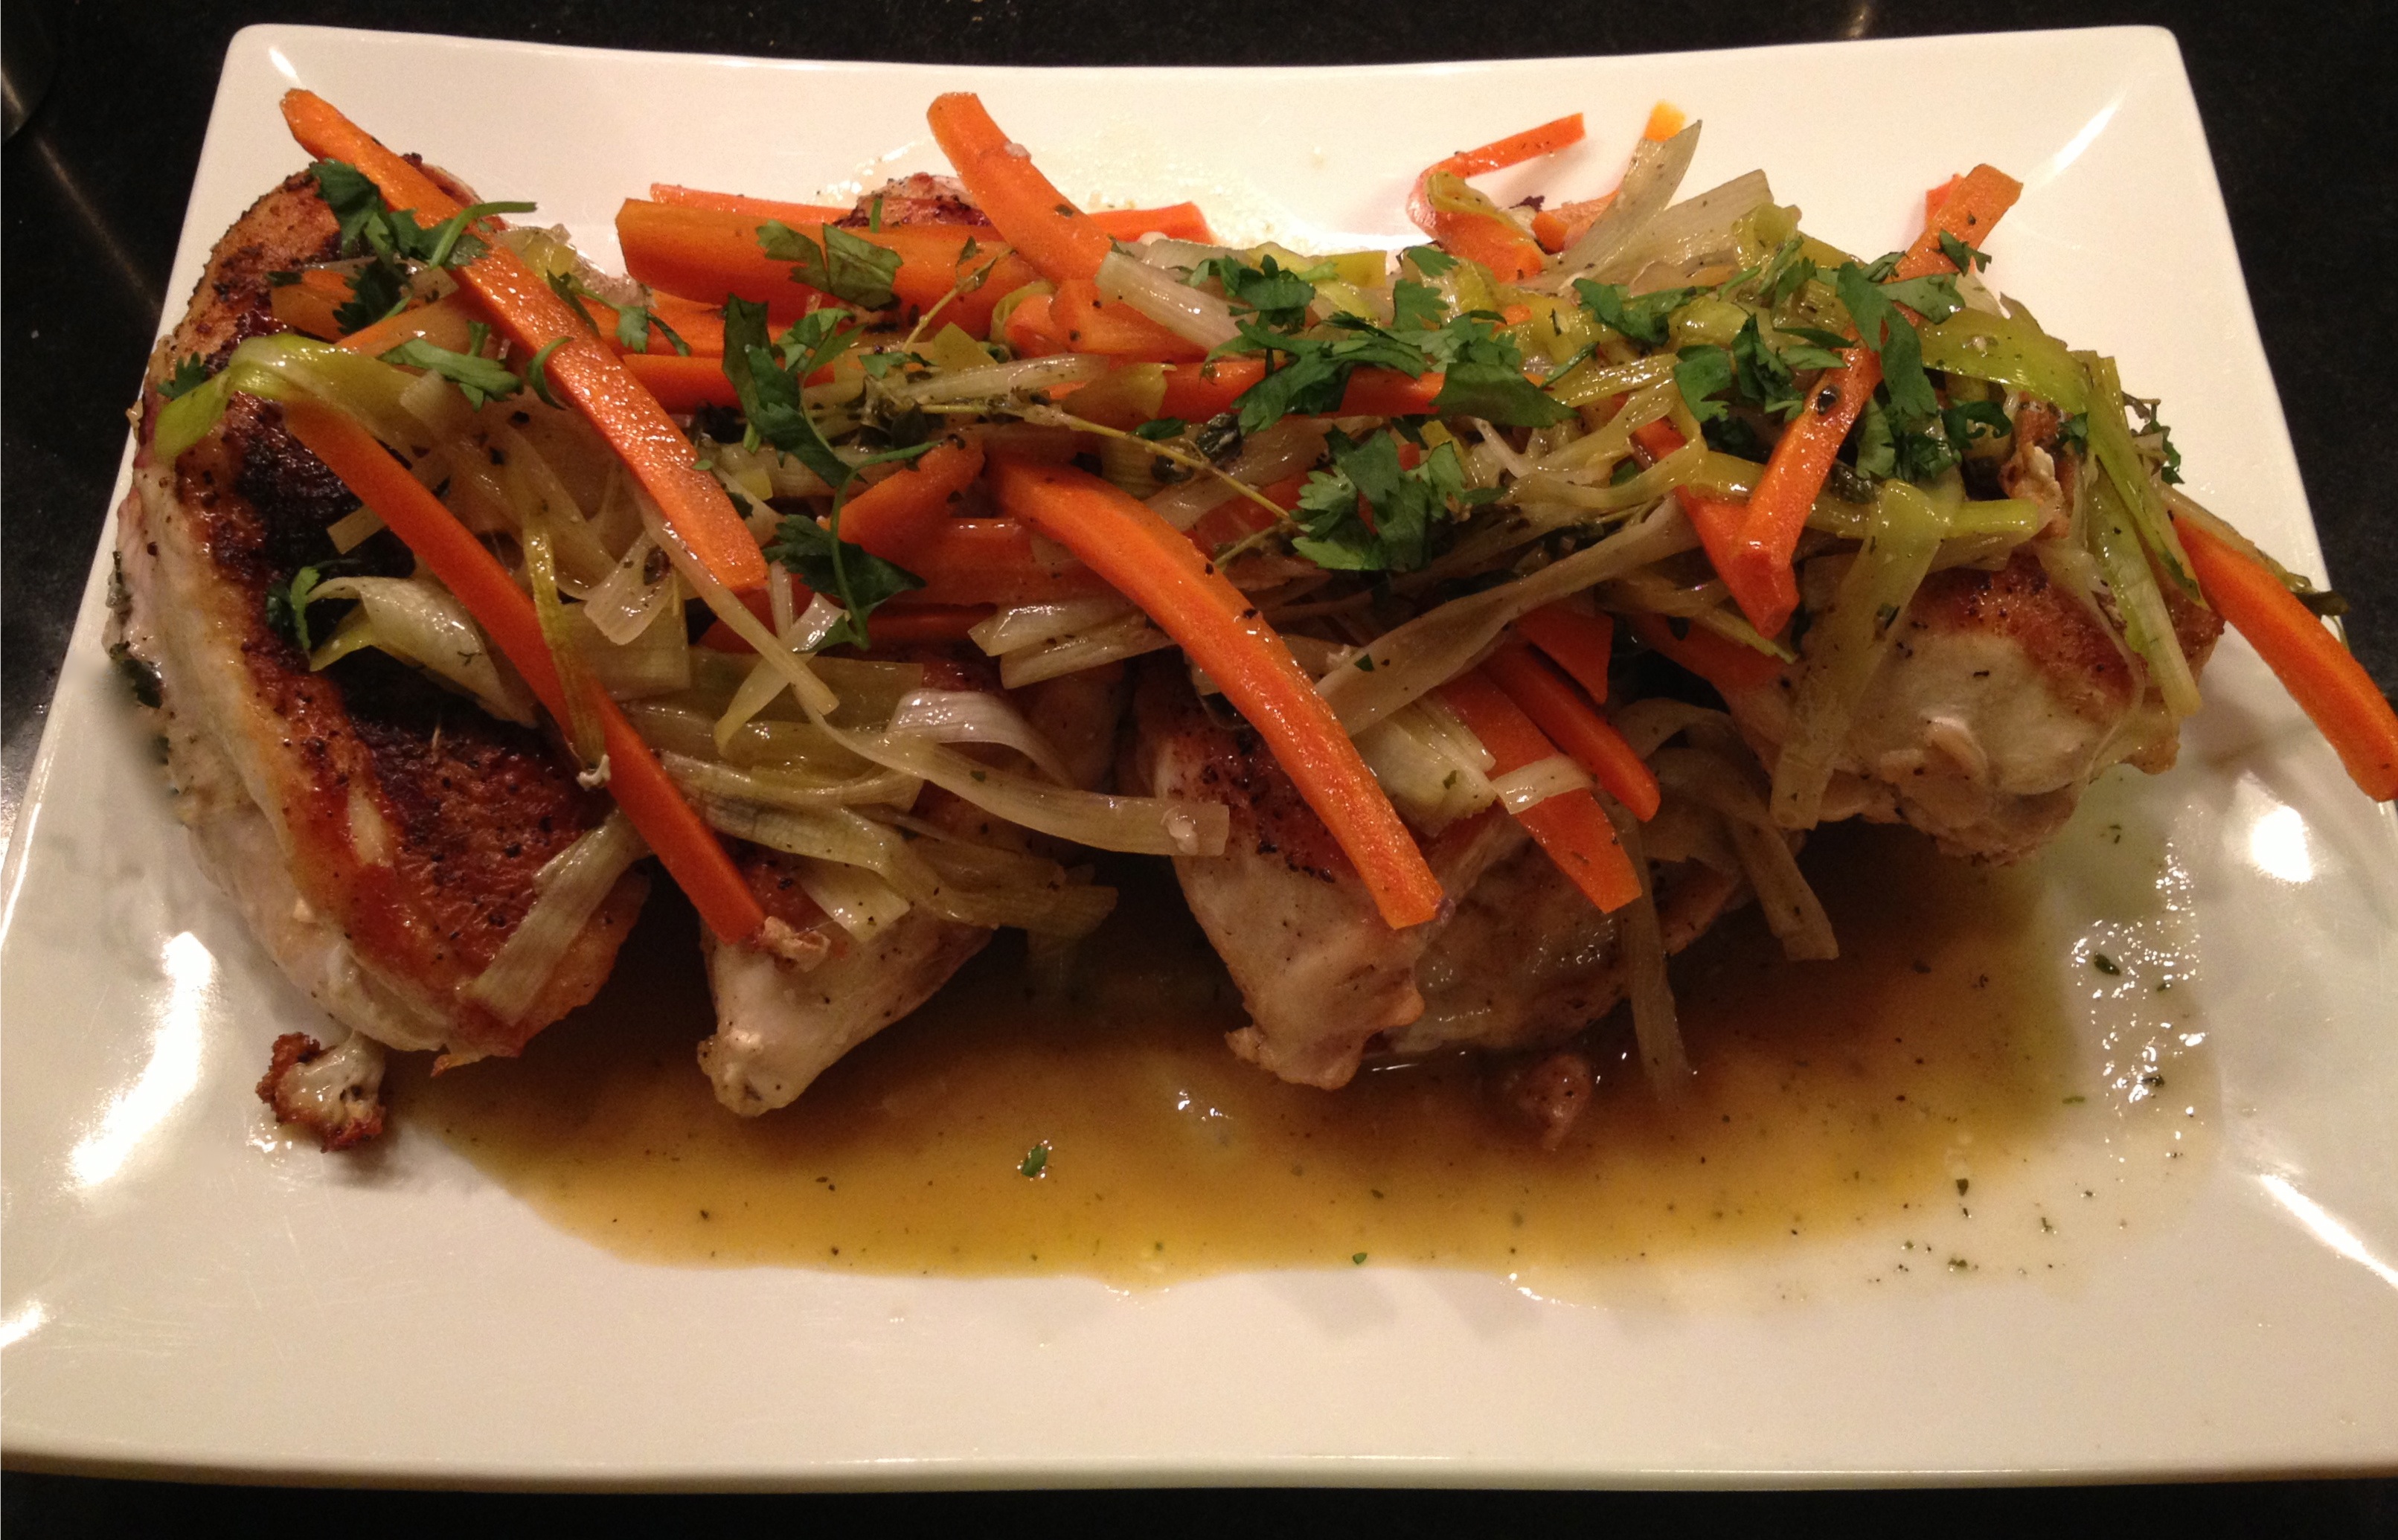 Pan roasted chicken breasts with carrots and leek, garnished with parsley on a white platter.